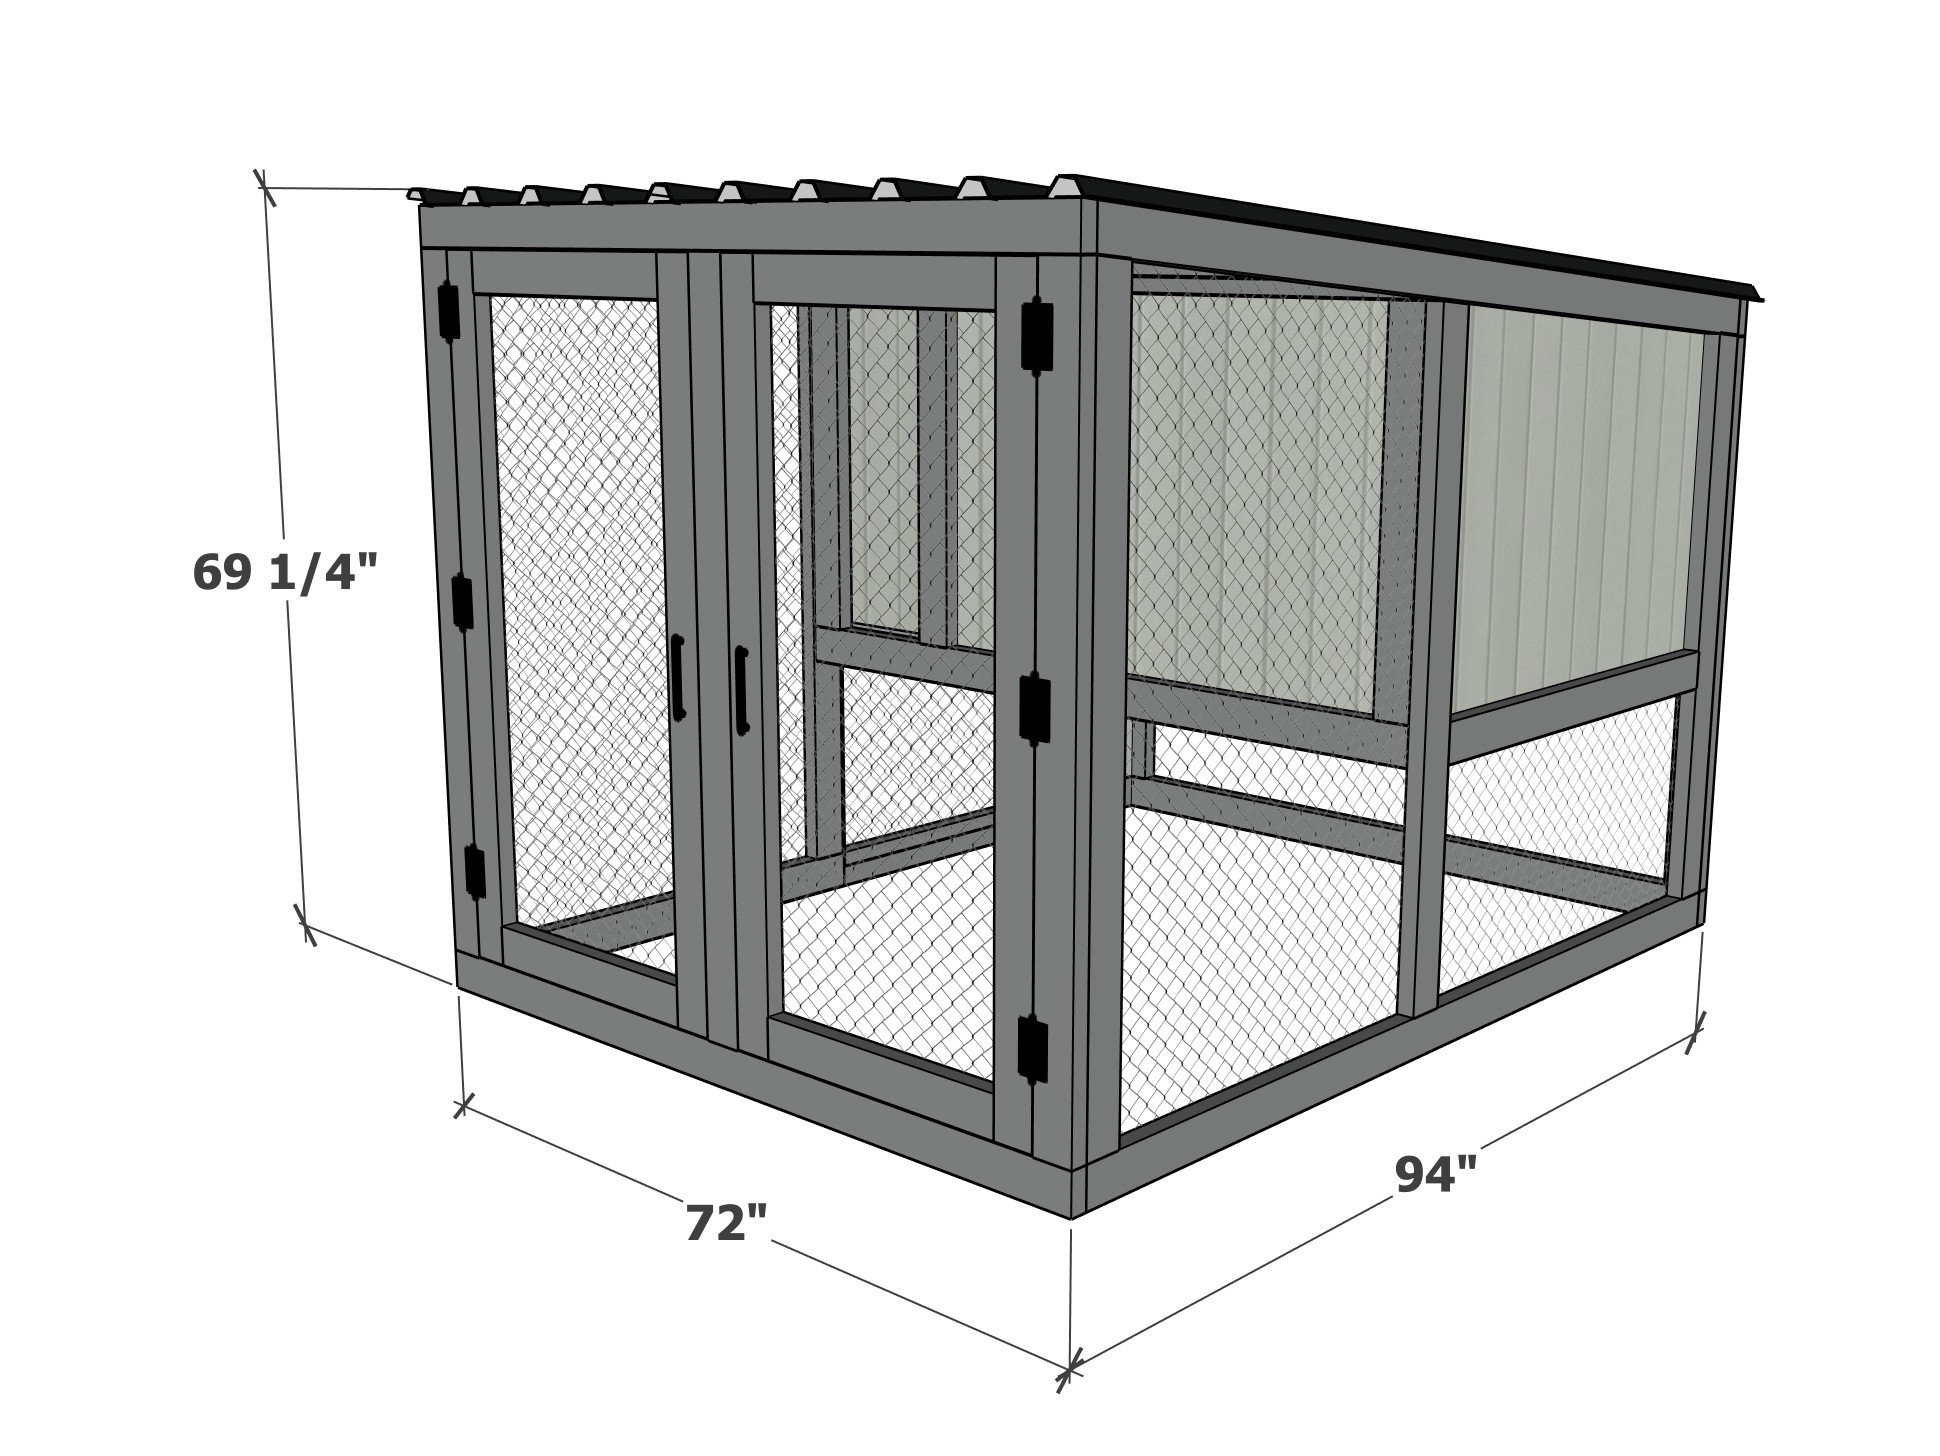 dimensions for double wide chicken coop plans